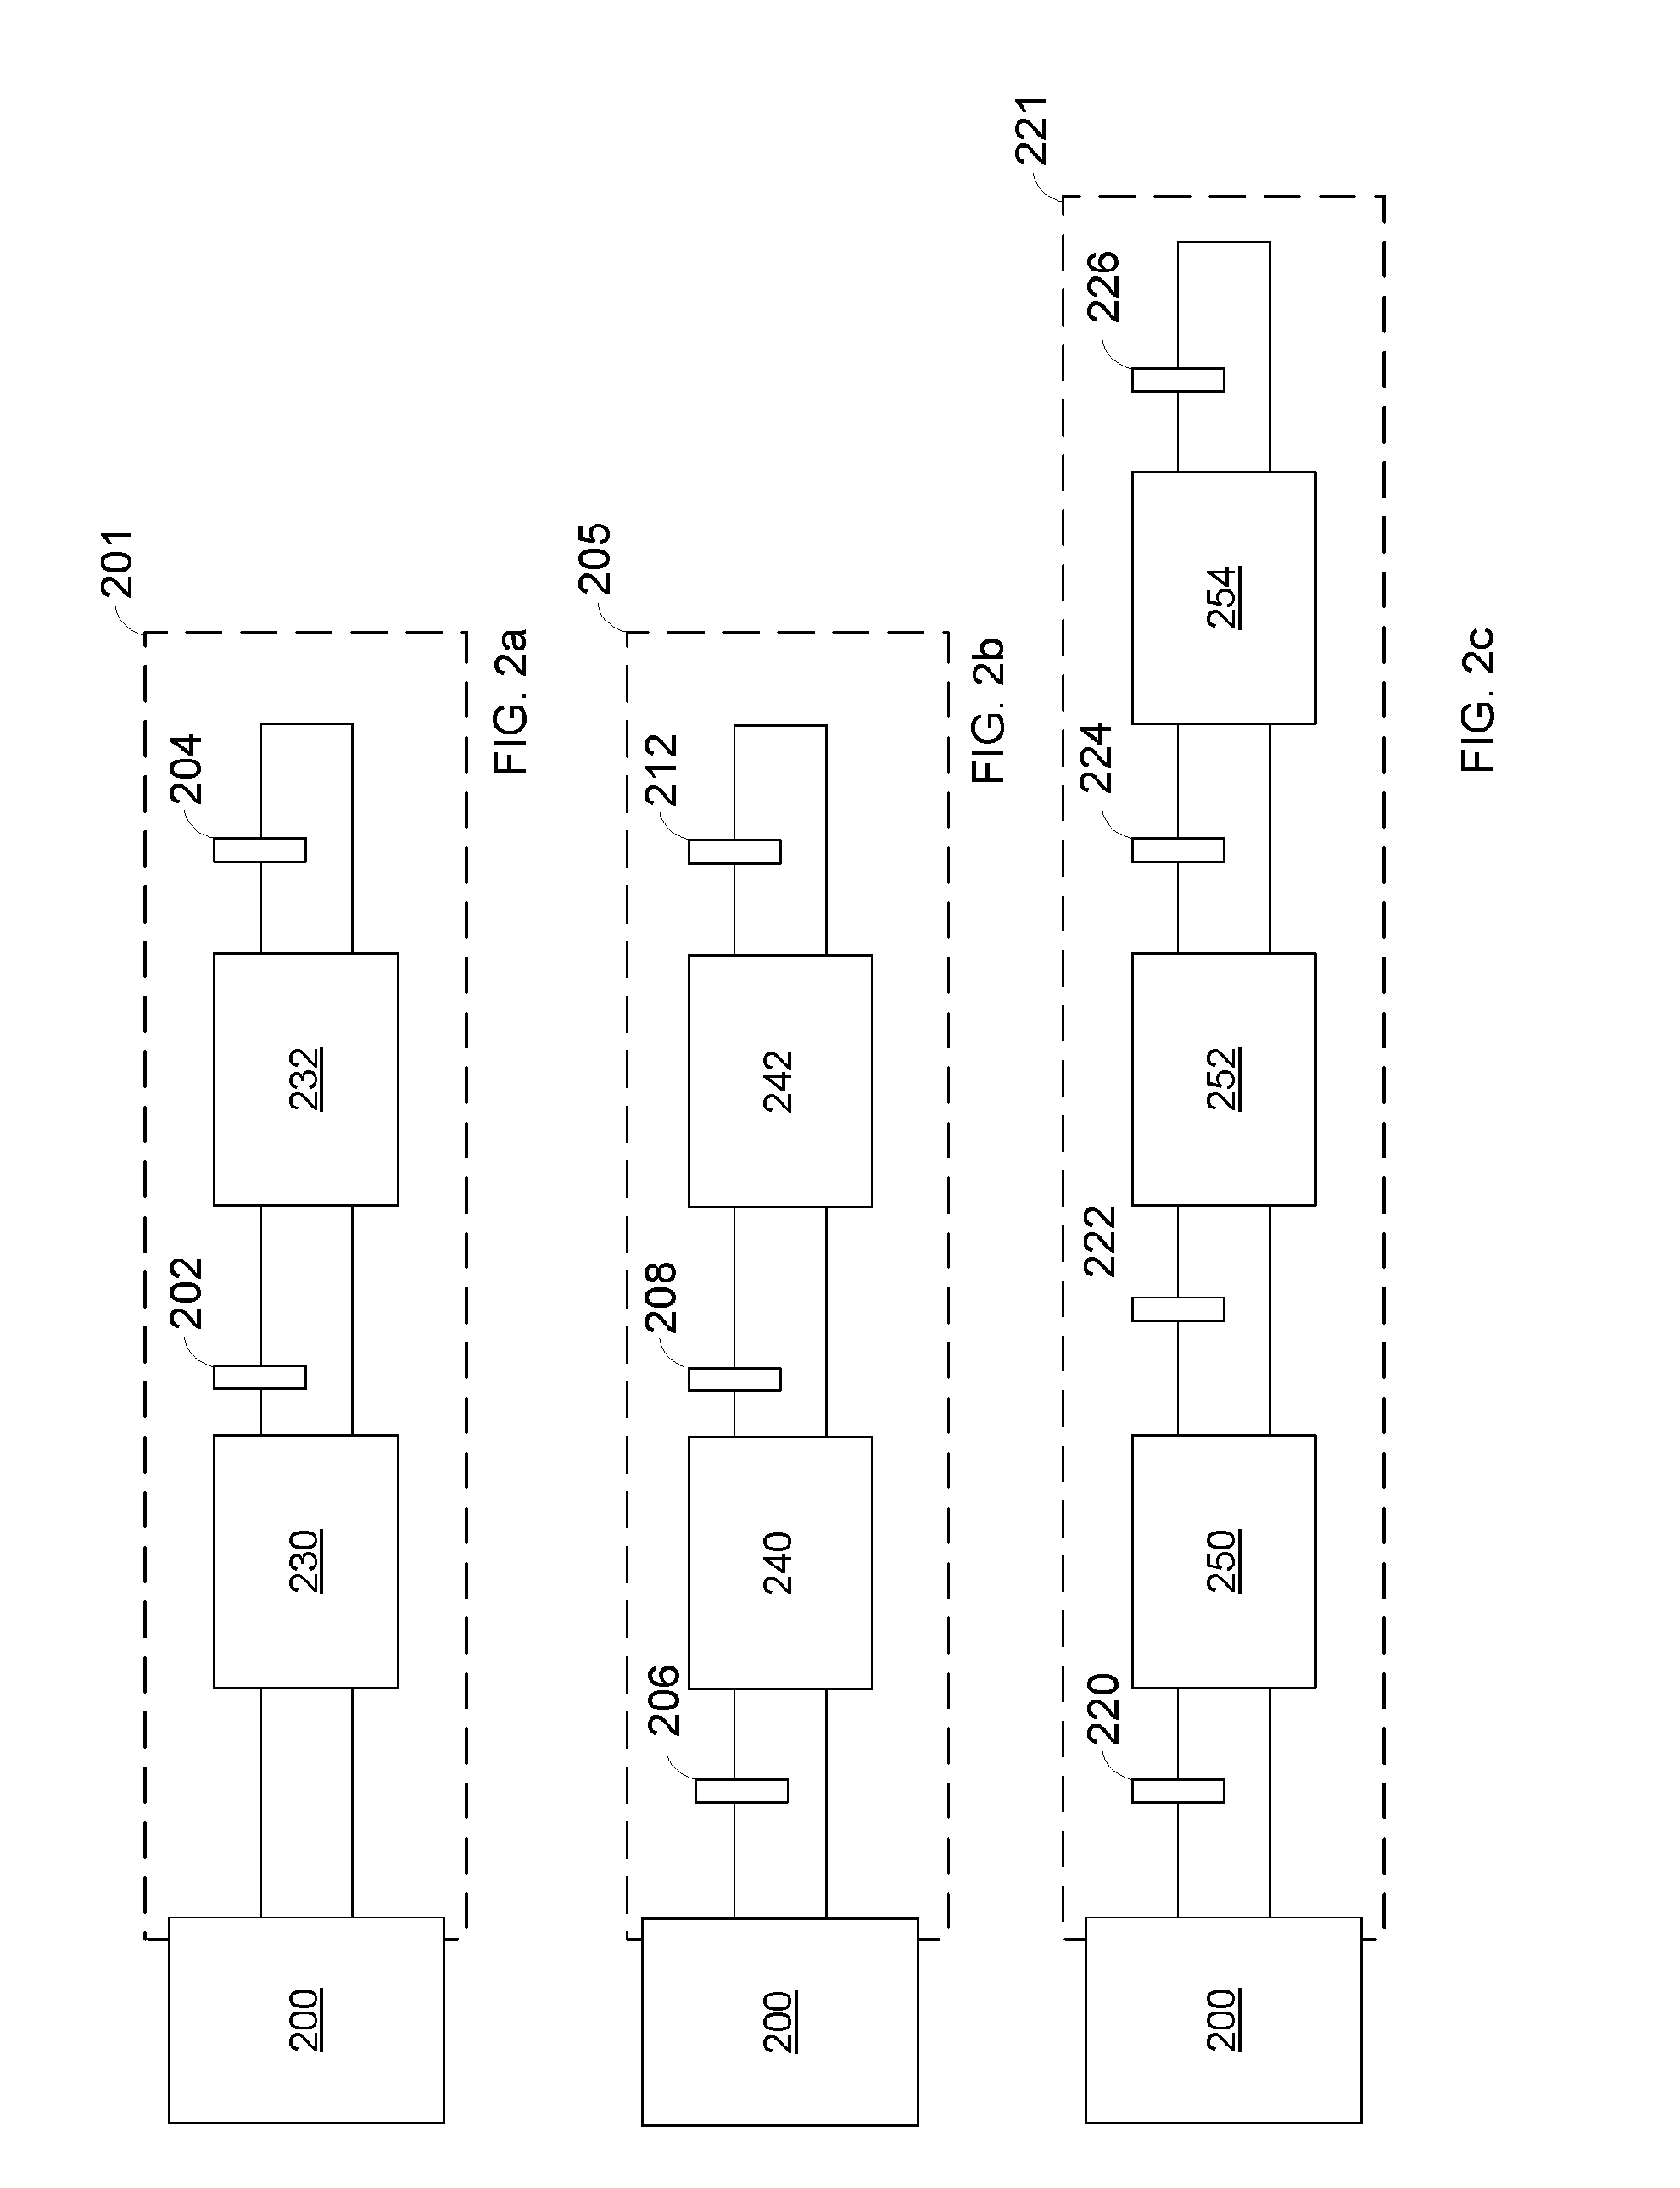 Method for controlling fuel of a spark ignited engine while regenerating a particulate filter